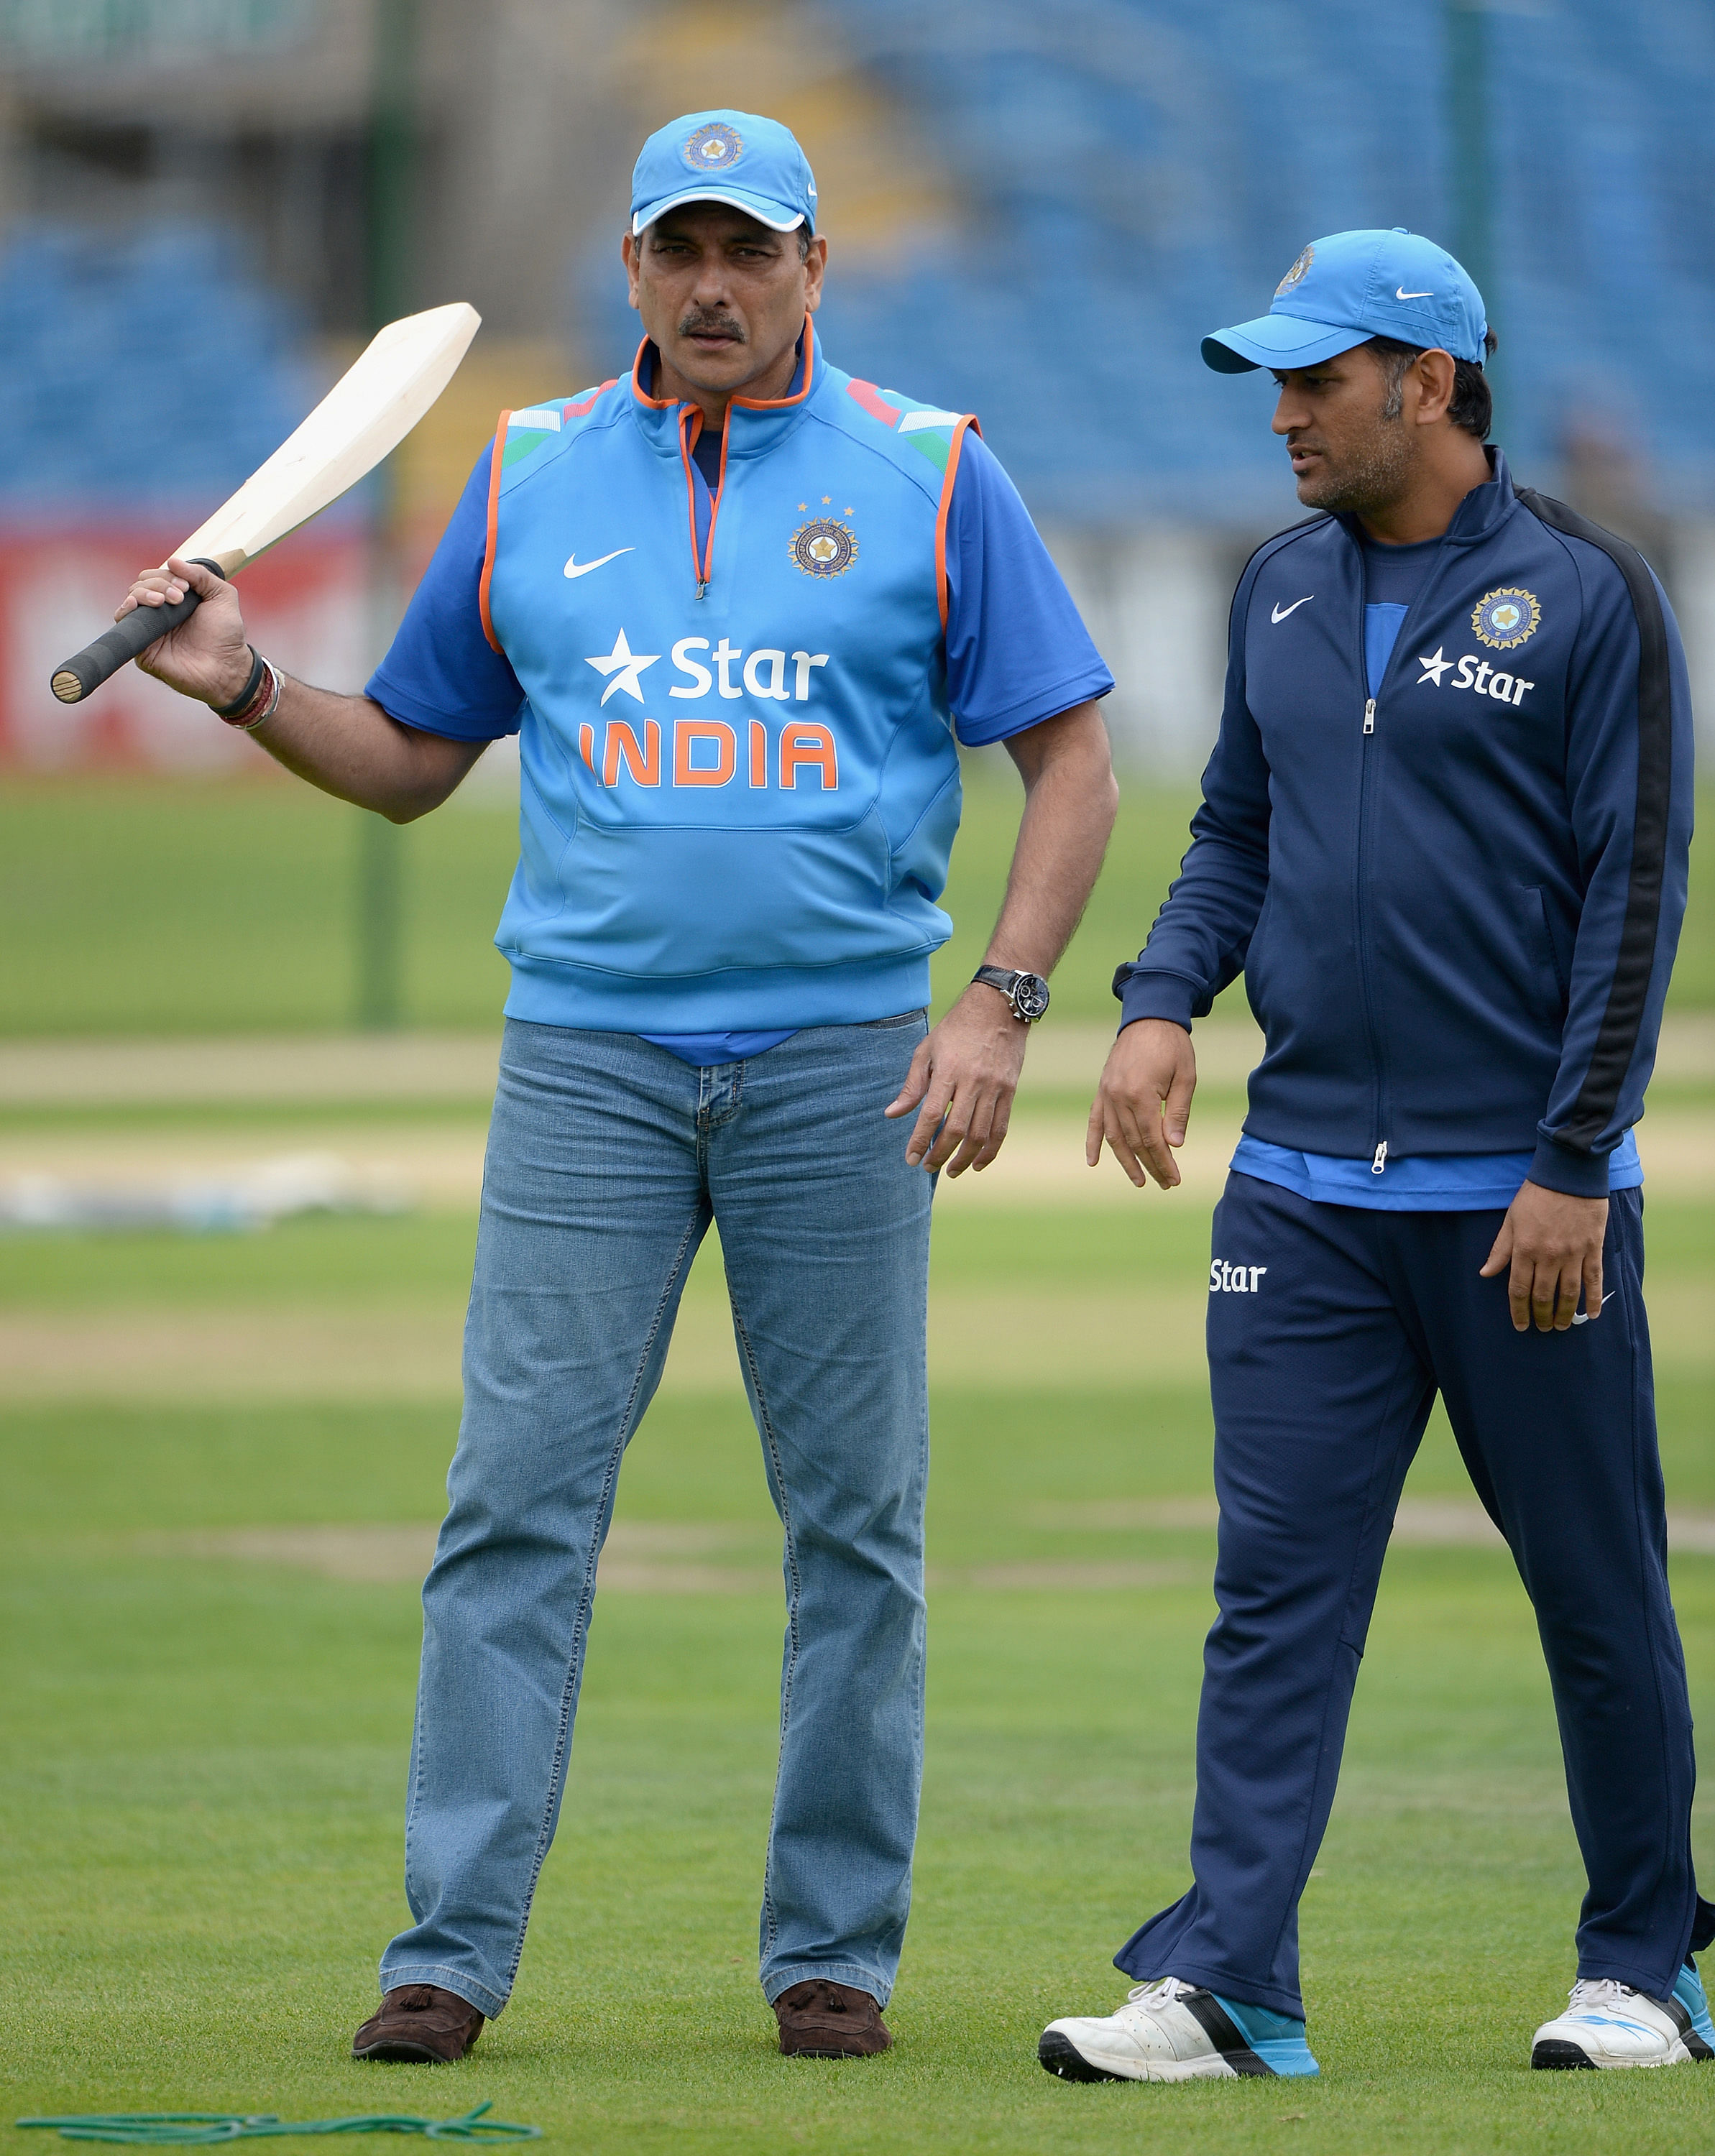 Taking a dig at the people criticising Dhoni, Shastri said that 'half the guys commenting on MS Dhoni can't even tie their shoelaces.' Photo/Getty